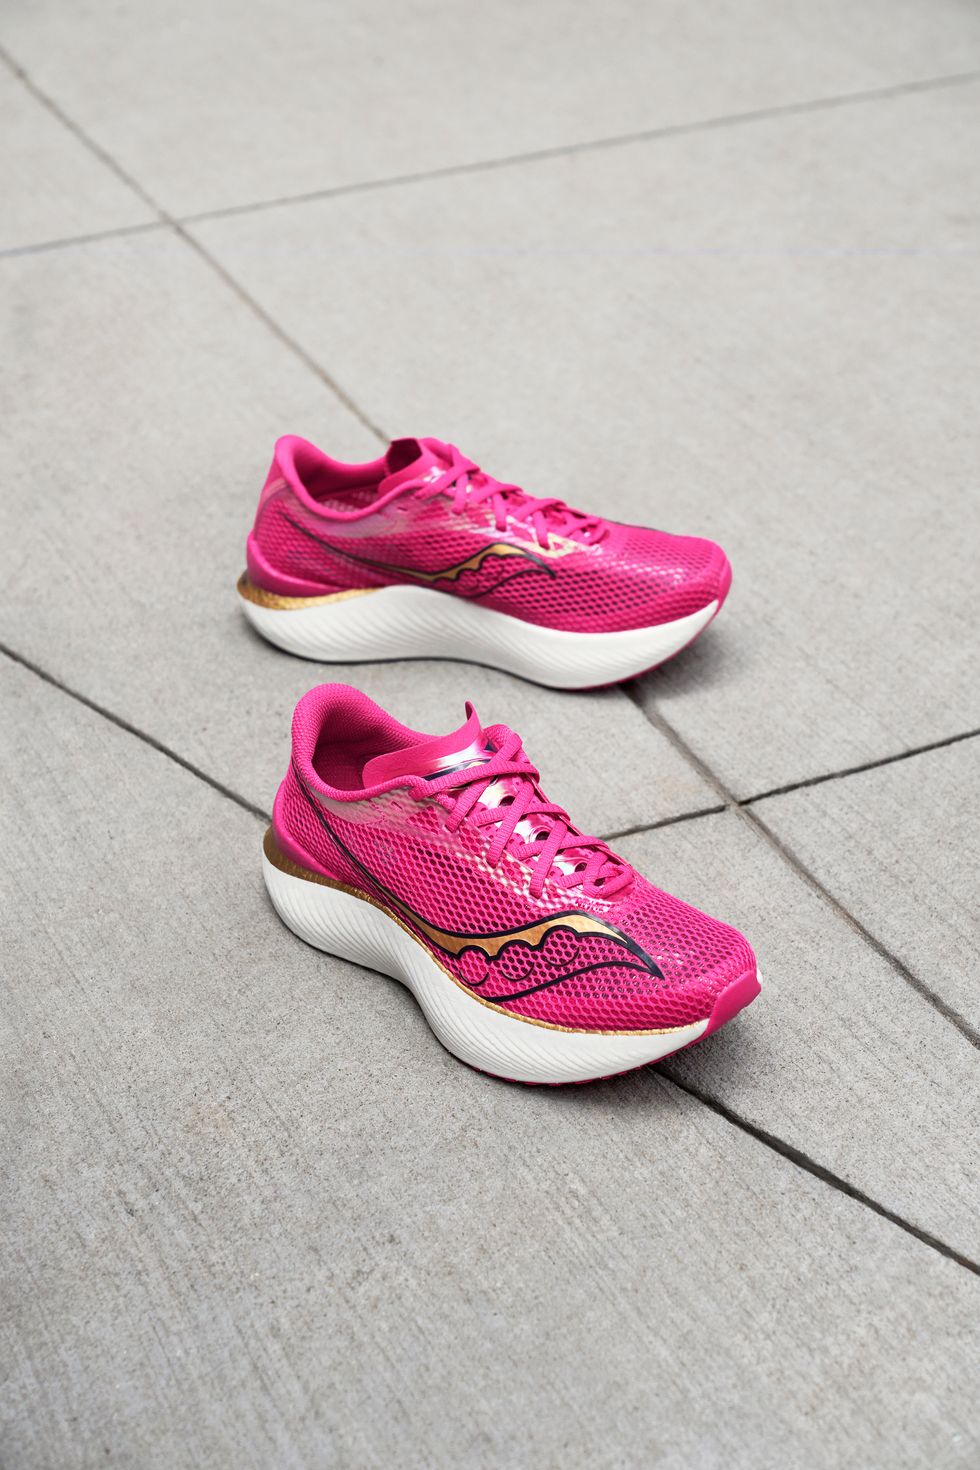 Saucony releases the Endorphin Pro 3 and Endorphin Speed 3